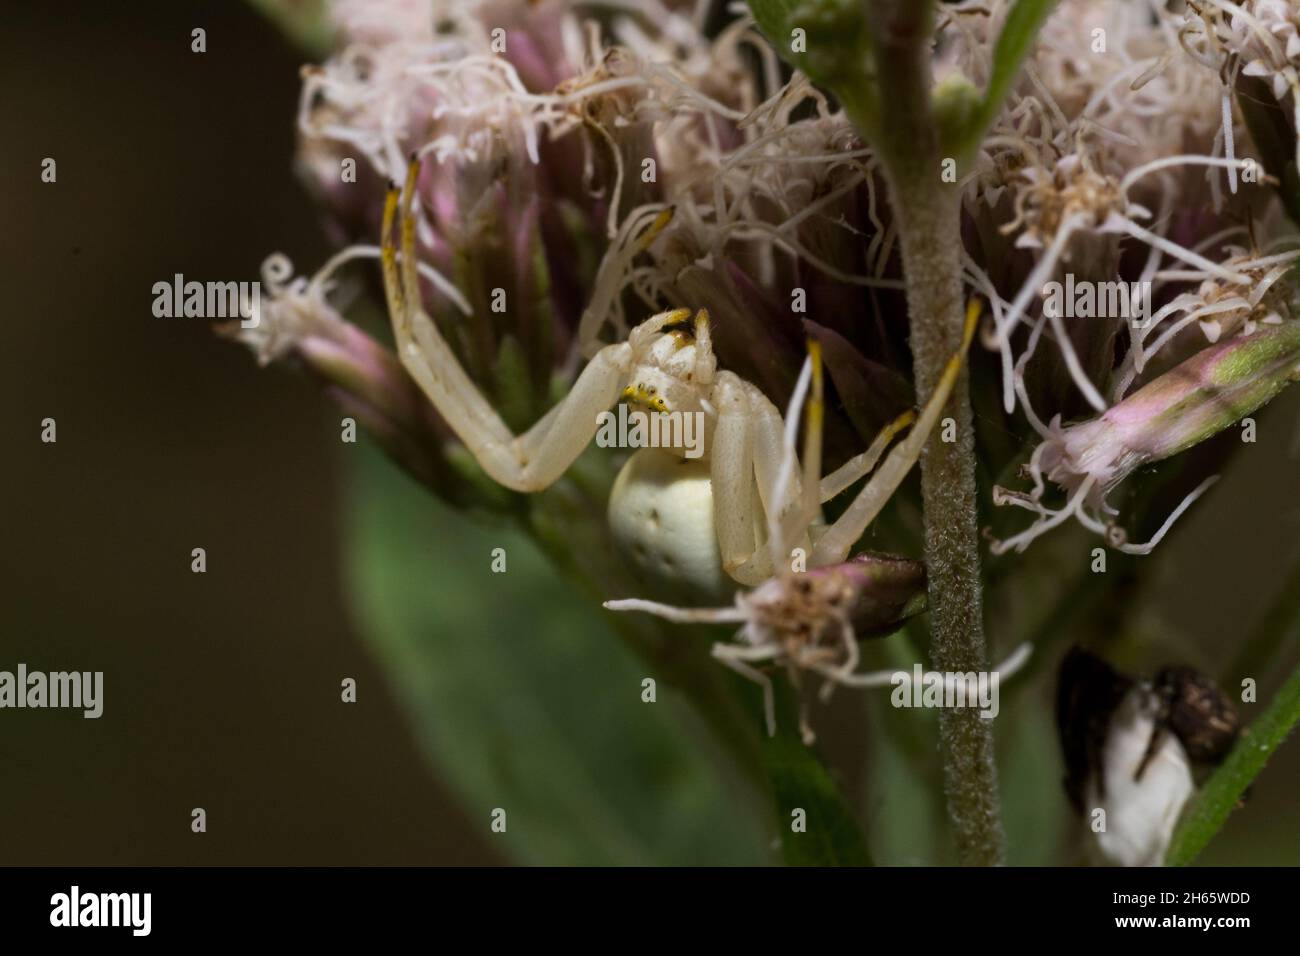 Selective focus shot of a white crab spider on a flower Stock Photo